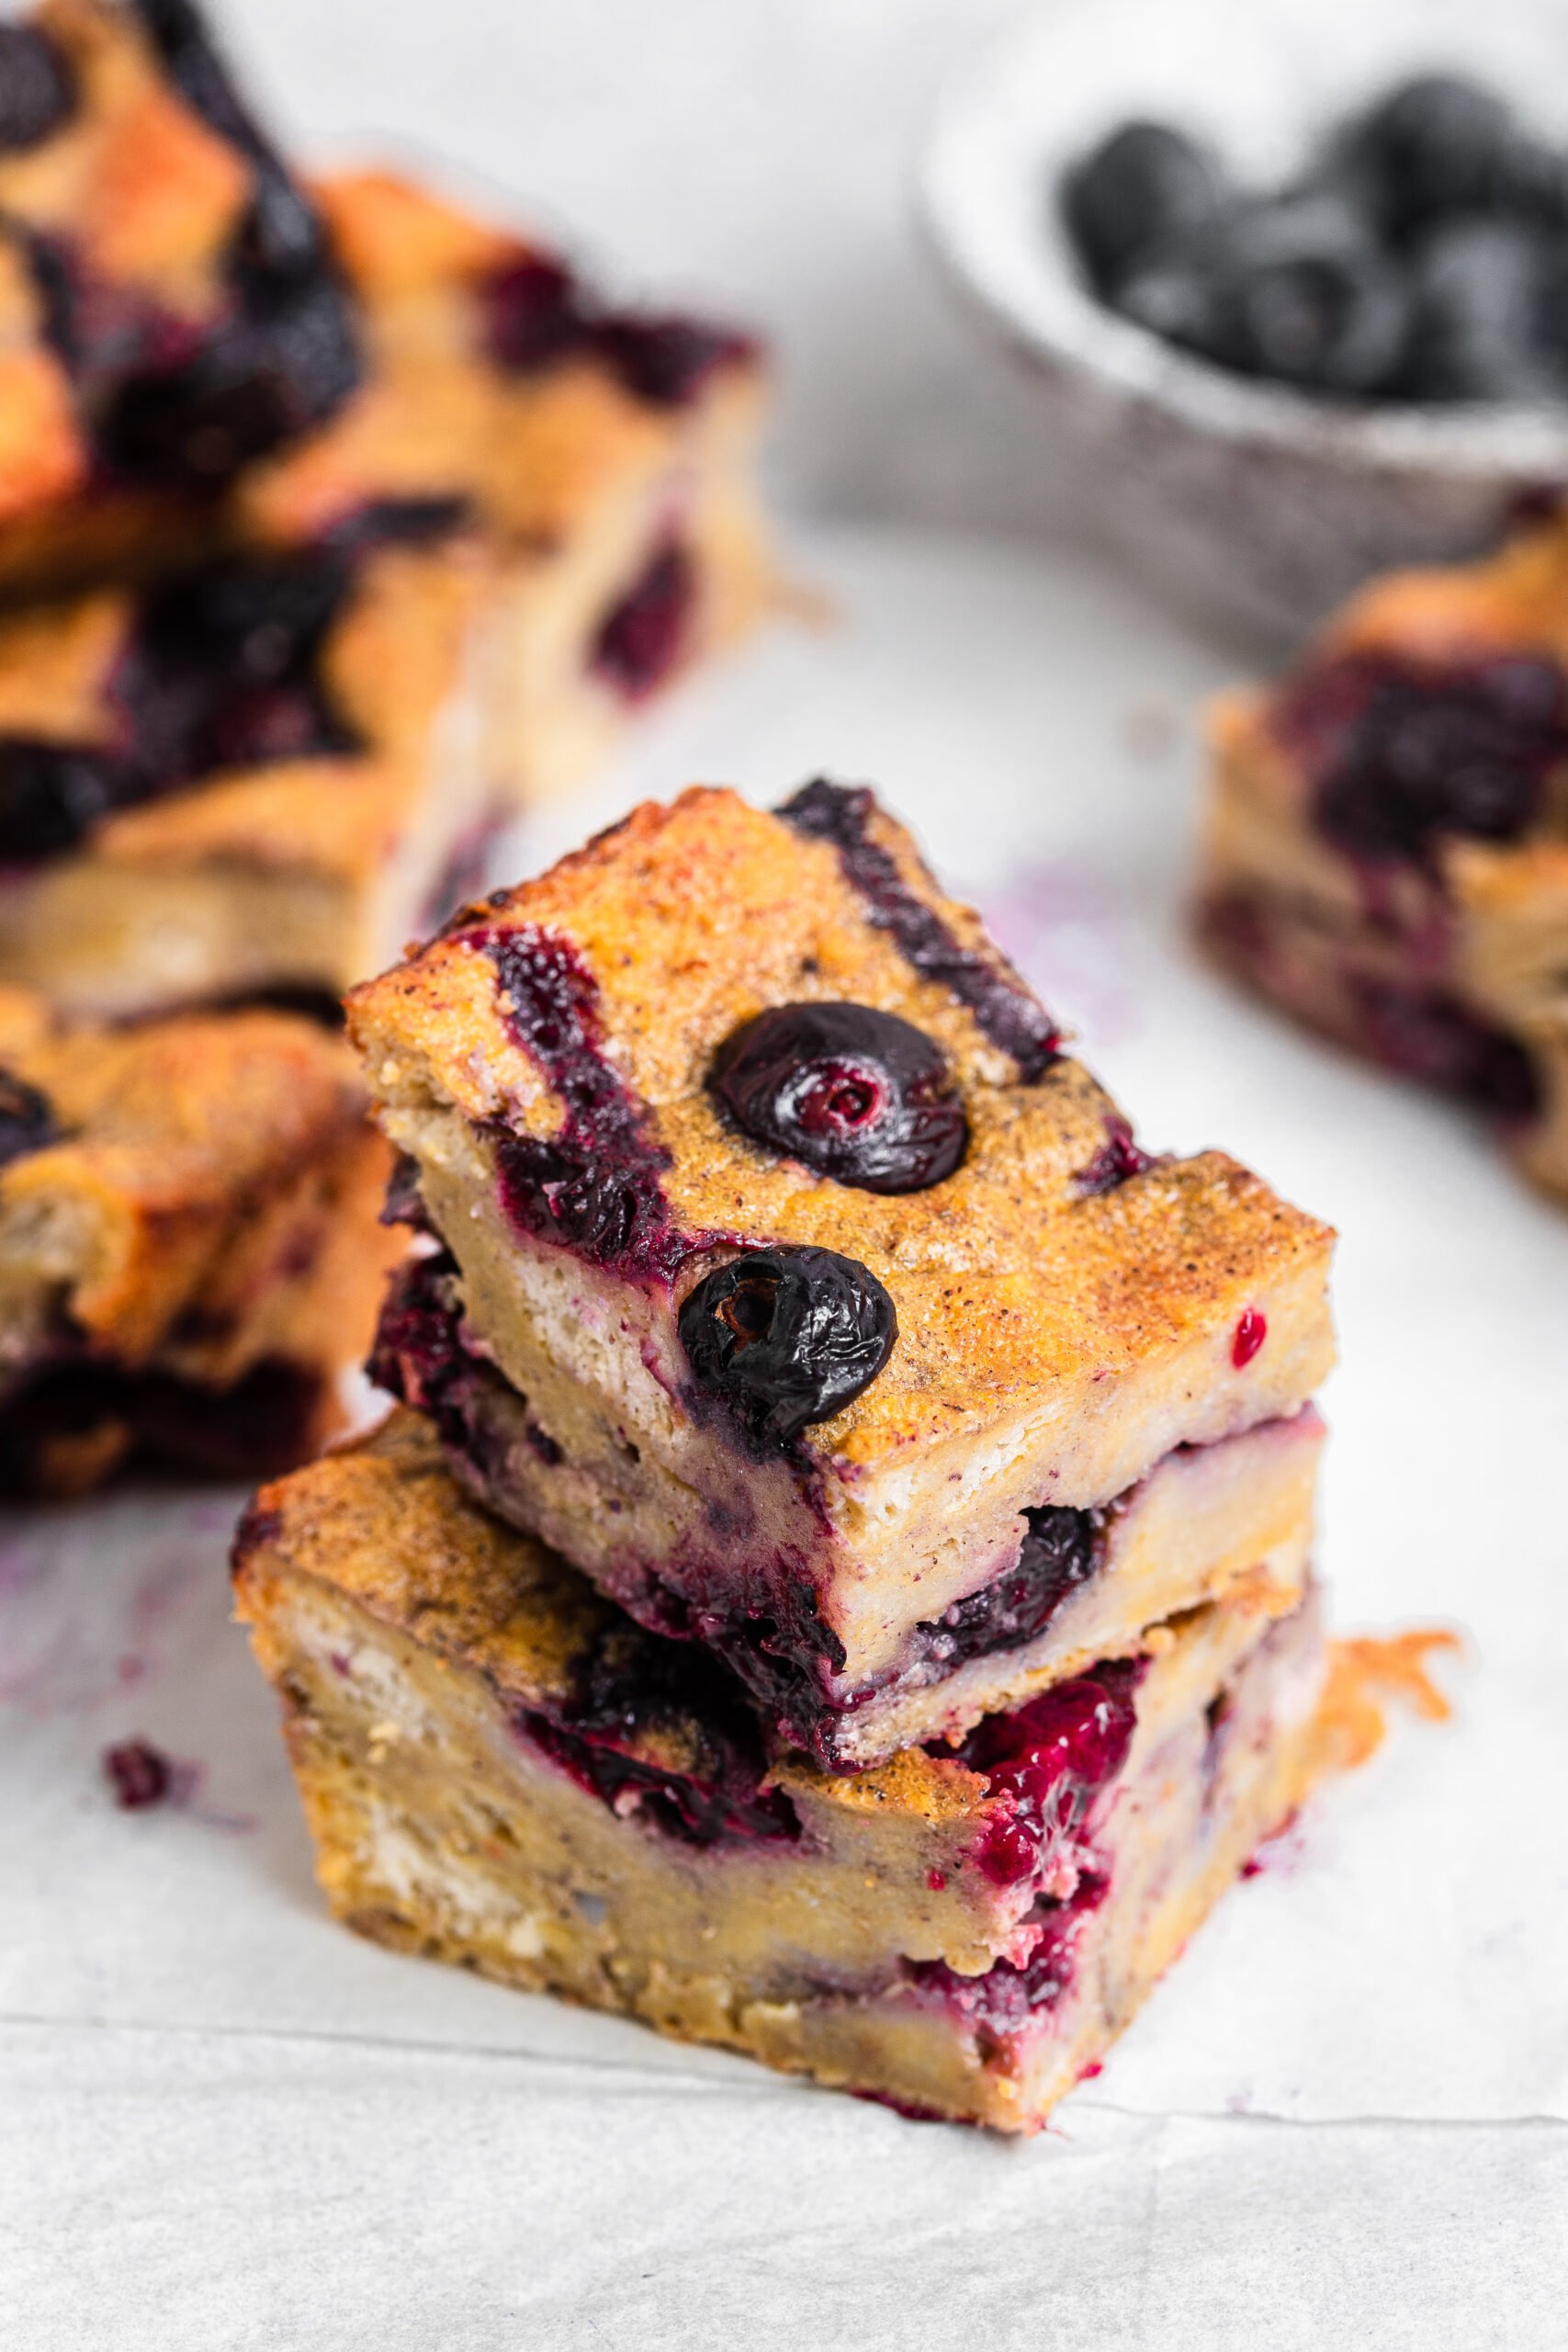 Blueberry French toast bake split into small pieces. Served with blueberries